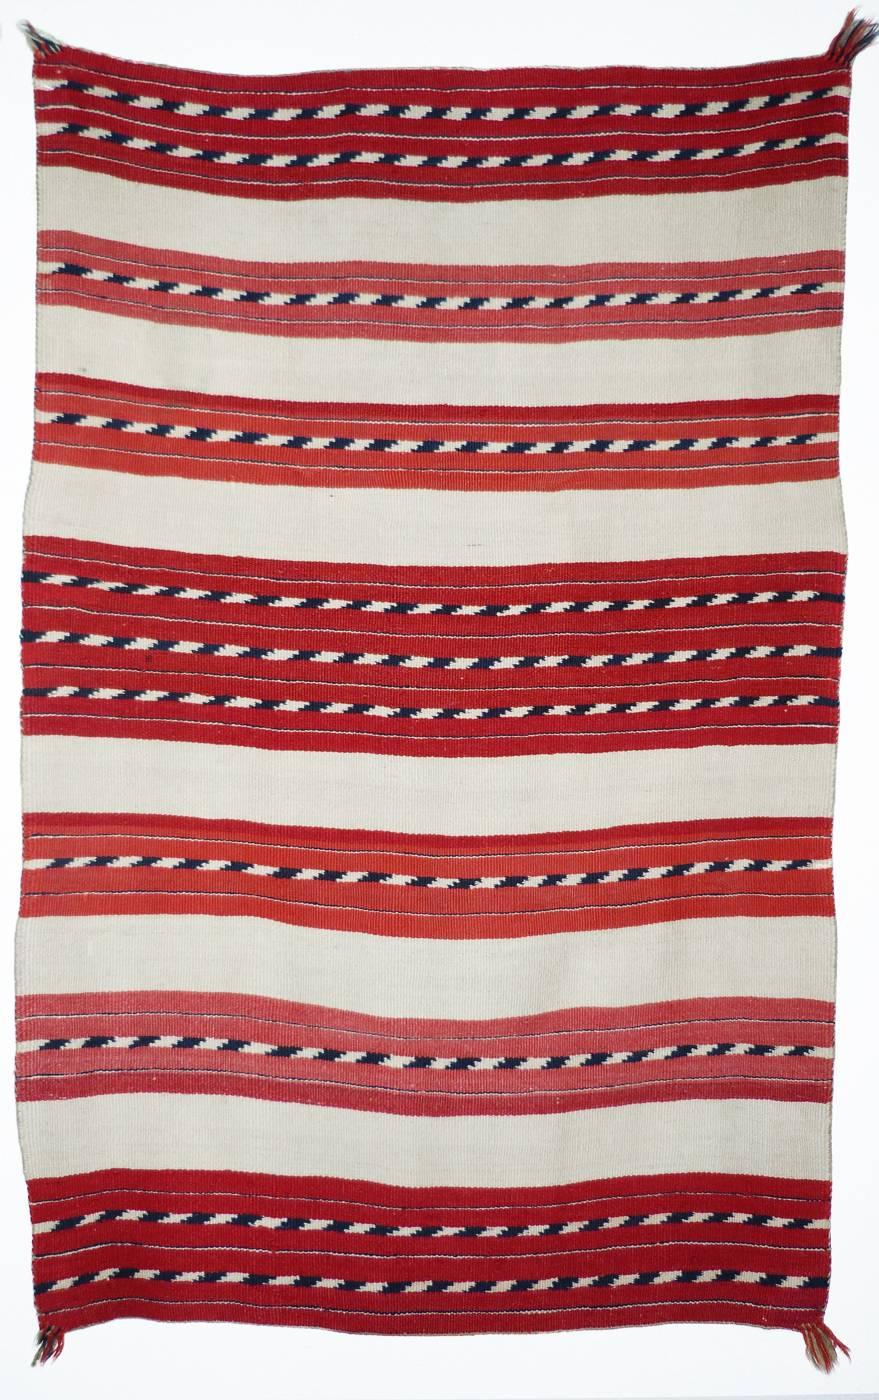 Shiprock Santa Fe is pleased to offer a rare opportunity for the discerning collector; a significant collection of late Classic Navajo child’s blankets.
The rarest and most sought after of native American weaving, the child’s blanket shares many